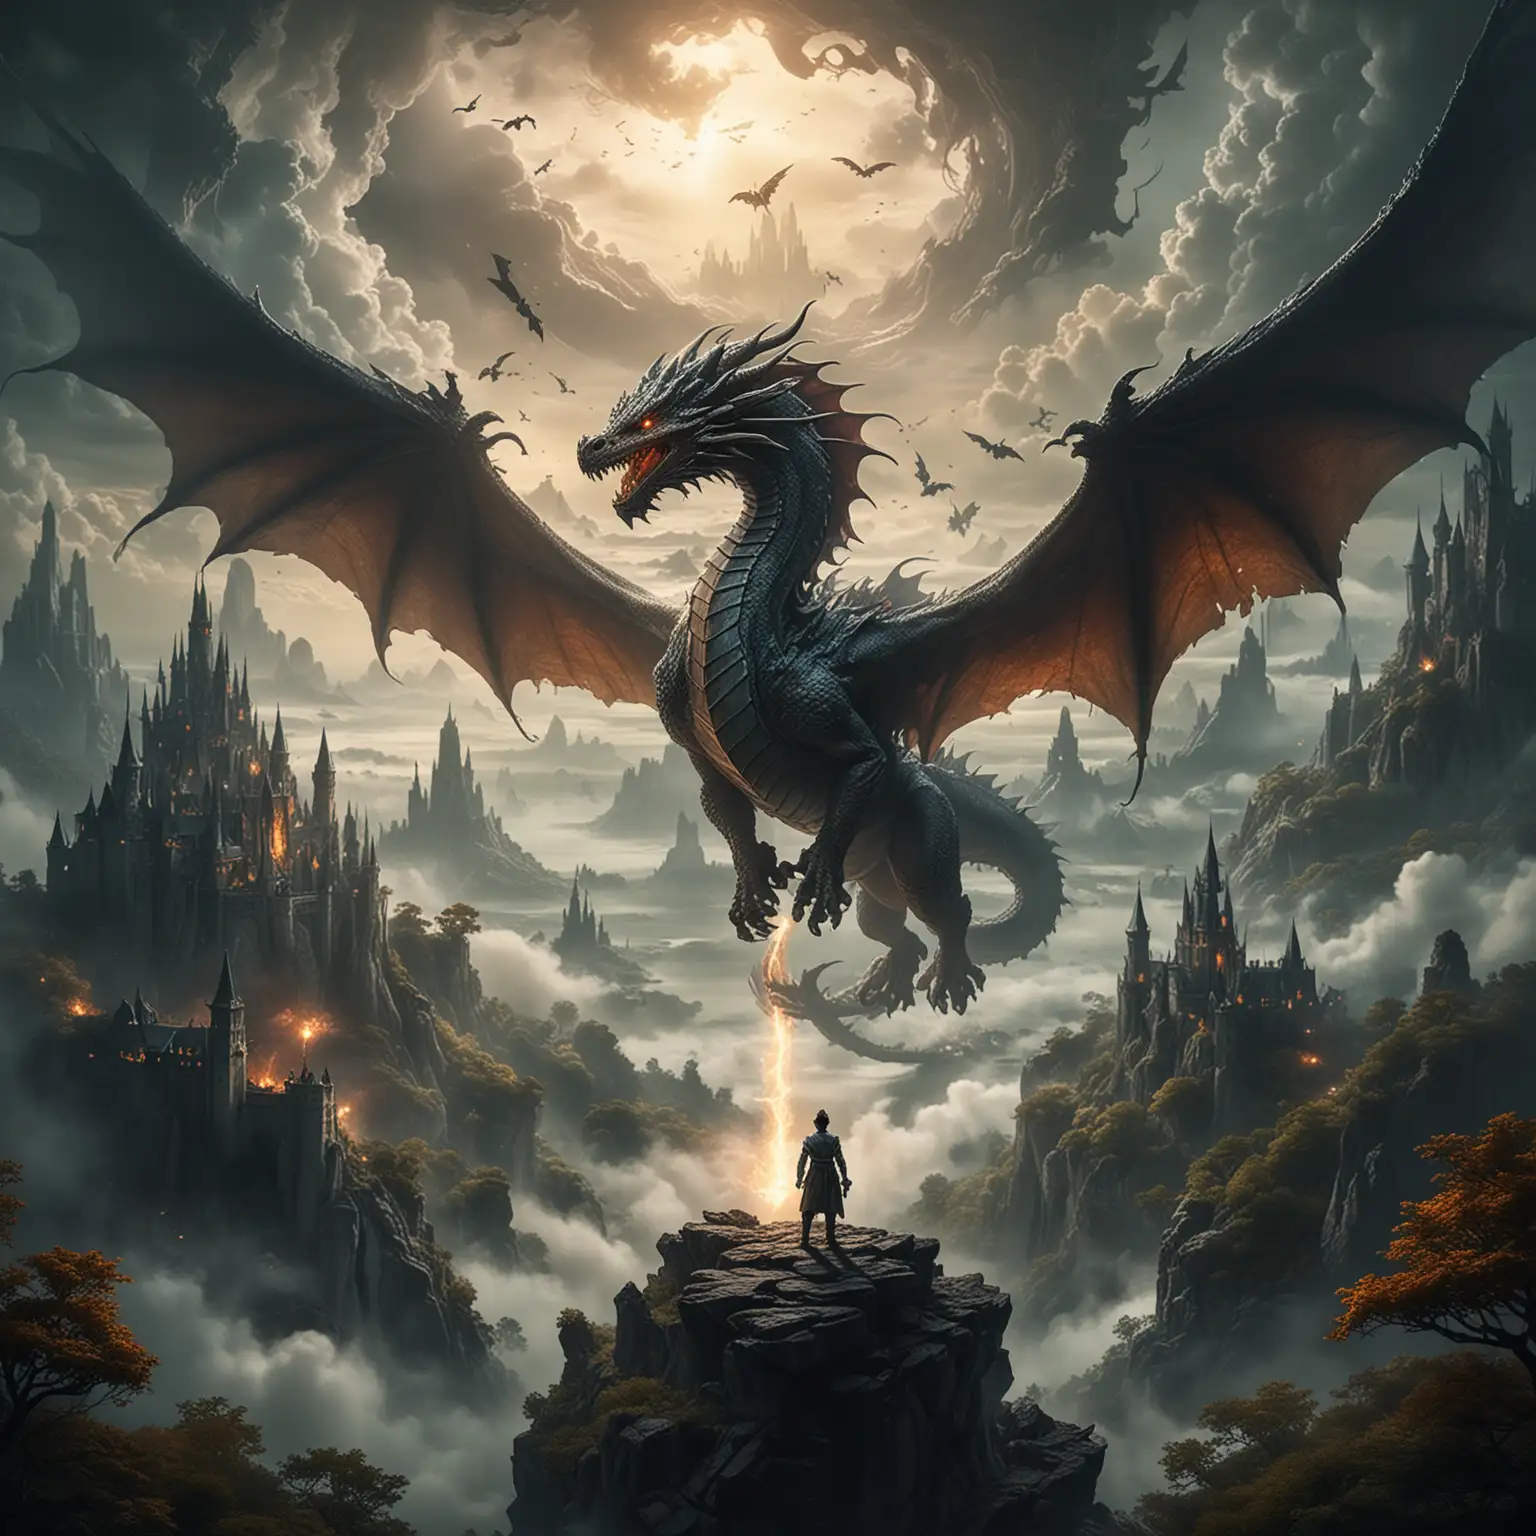 A realistic beautiful photo depicting the magical world of fantasy, where the boundaries of reality dissolve like a fog. At the center of the composition, a majestic dragon cuts through the sky with its powerful wings, symbolizing endless possibilities and extraordinary adventures.

Below, a powerful magician wields the forces of nature, drawing his will in the ether. Its aura radiates a bright glow, showing the power and control over the elements. In the background there is an epic landscape, where good and evil fight their eternal battles, and the fate of the heroes is intertwined with legends.

On the right we see hazy, dark forests and mysterious cities that invite you to discover your secrets. Every corner of this world offers a chance for new discoveries and learning, reflecting our deepest desires and fears.